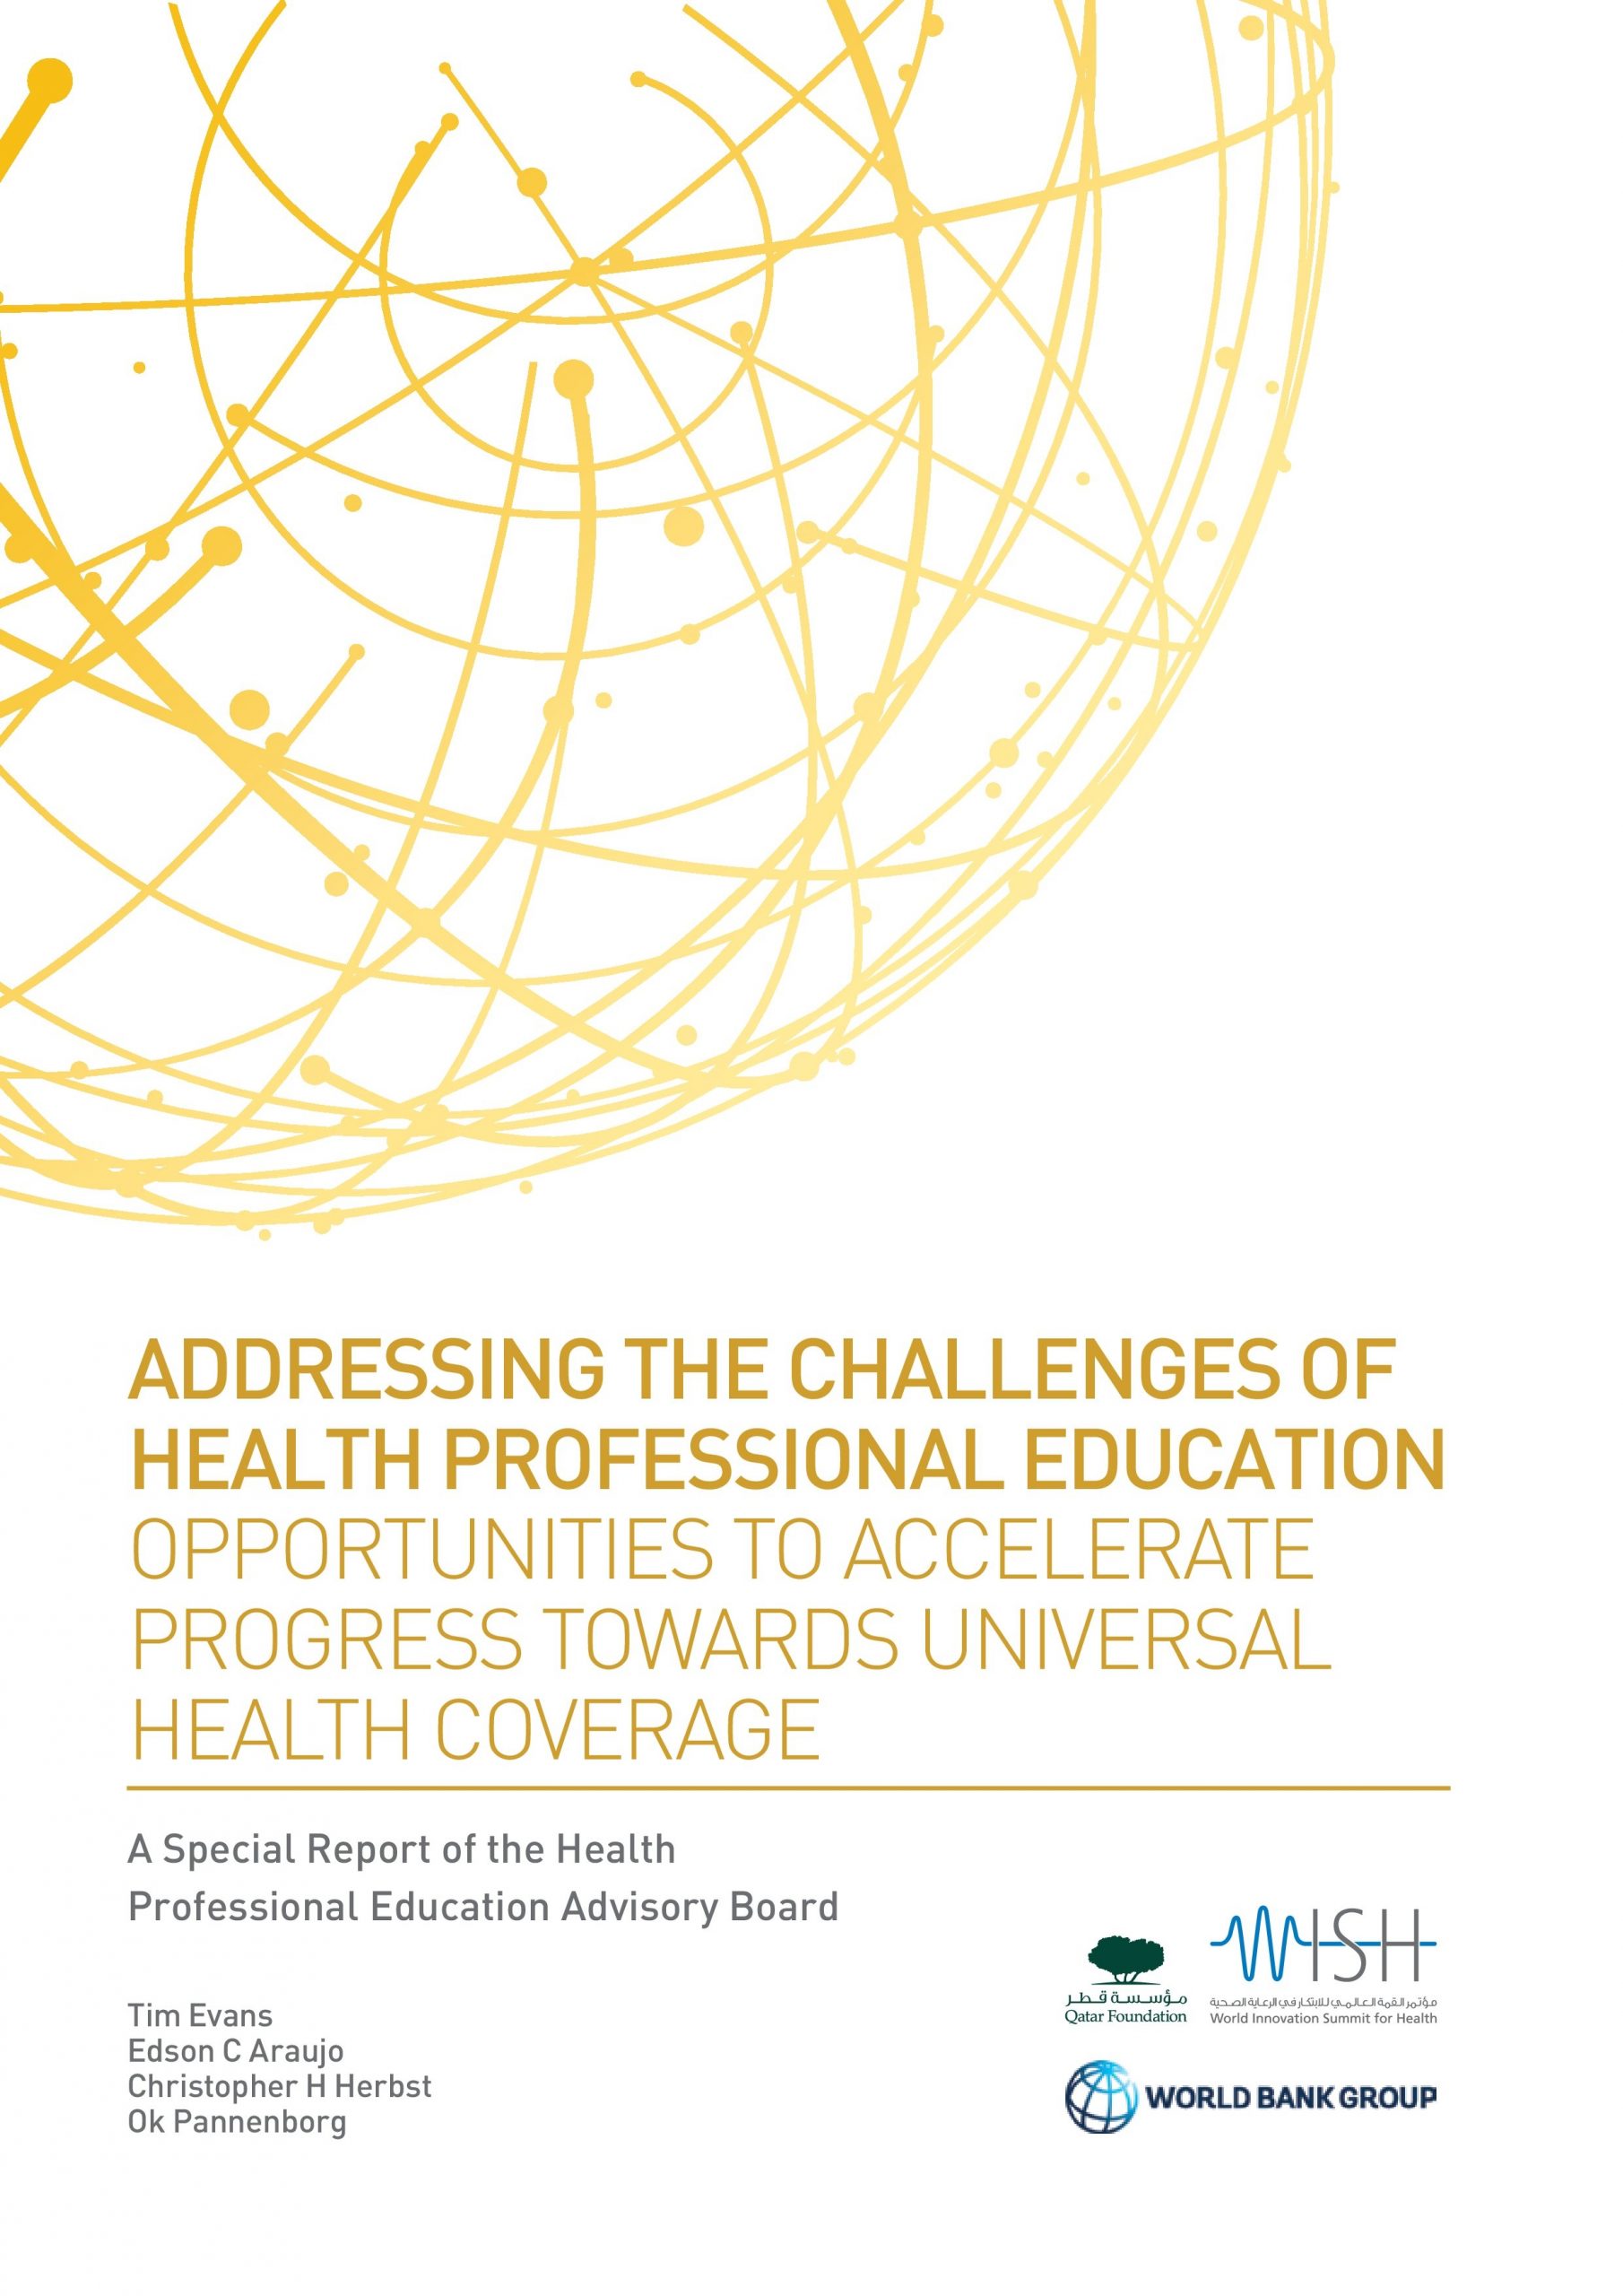 Addressing the Challenges of health Professional Education: Opportunities to Accelerate Progress Towards Universal Health Coverage